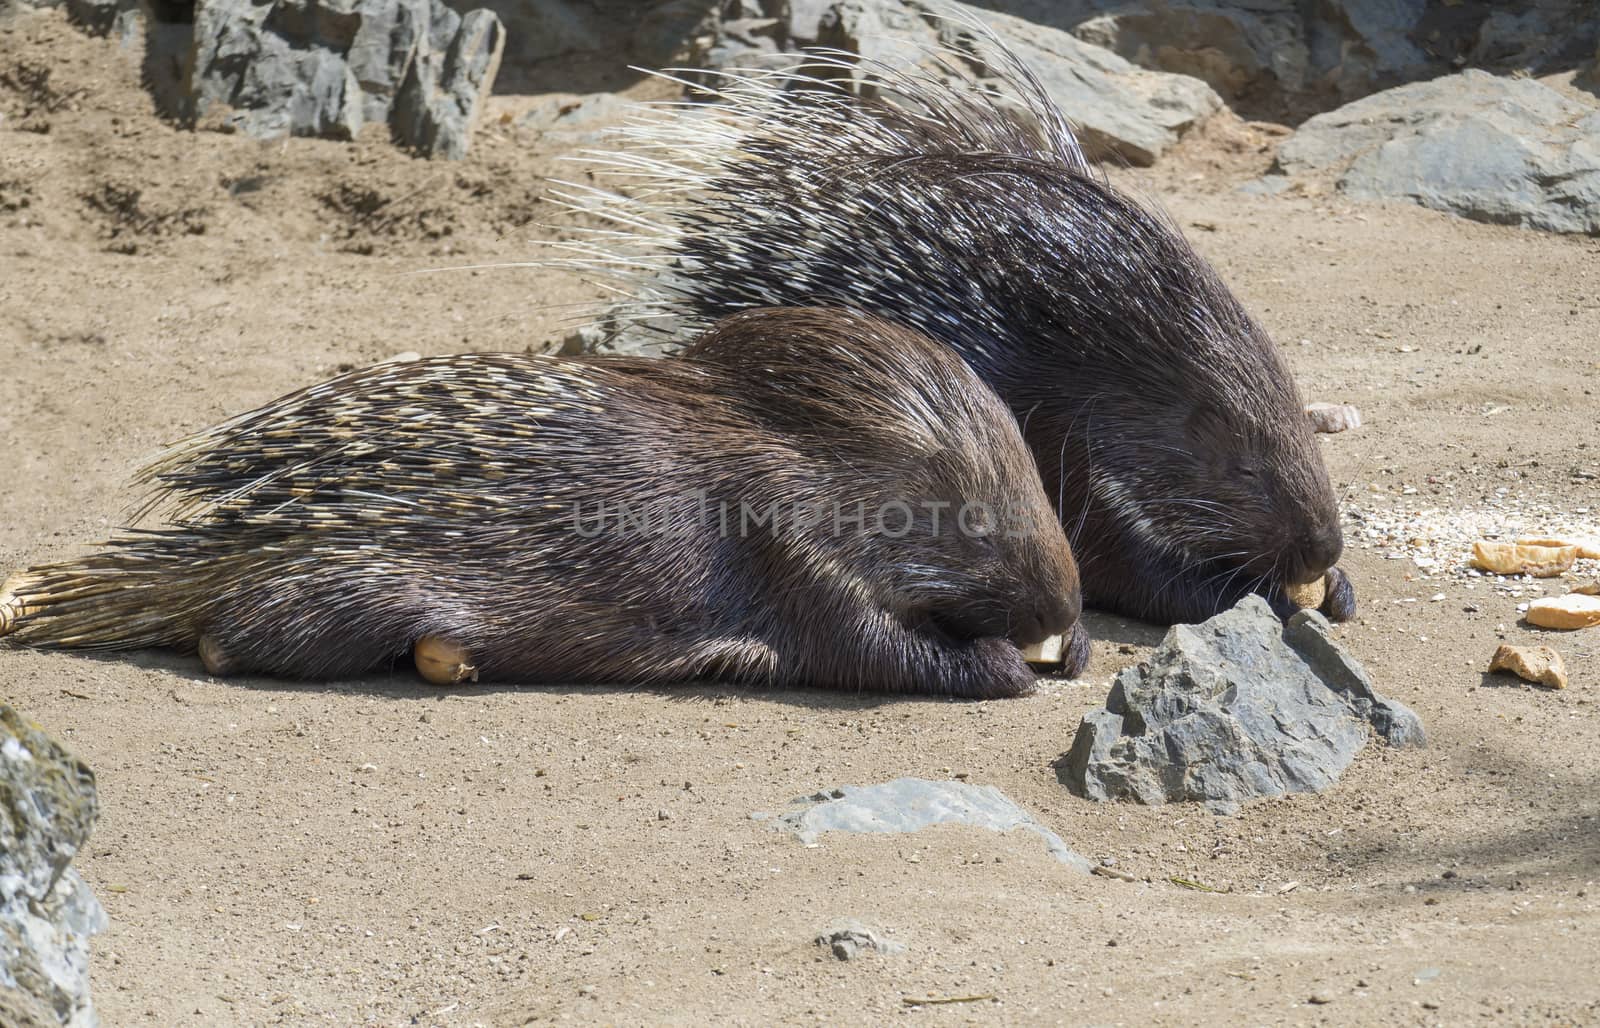 Close up portrait of Indian Crested Porcupine, Hystrix indica couple eating vegetables and bread, outdoor sand and rock background. by Henkeova